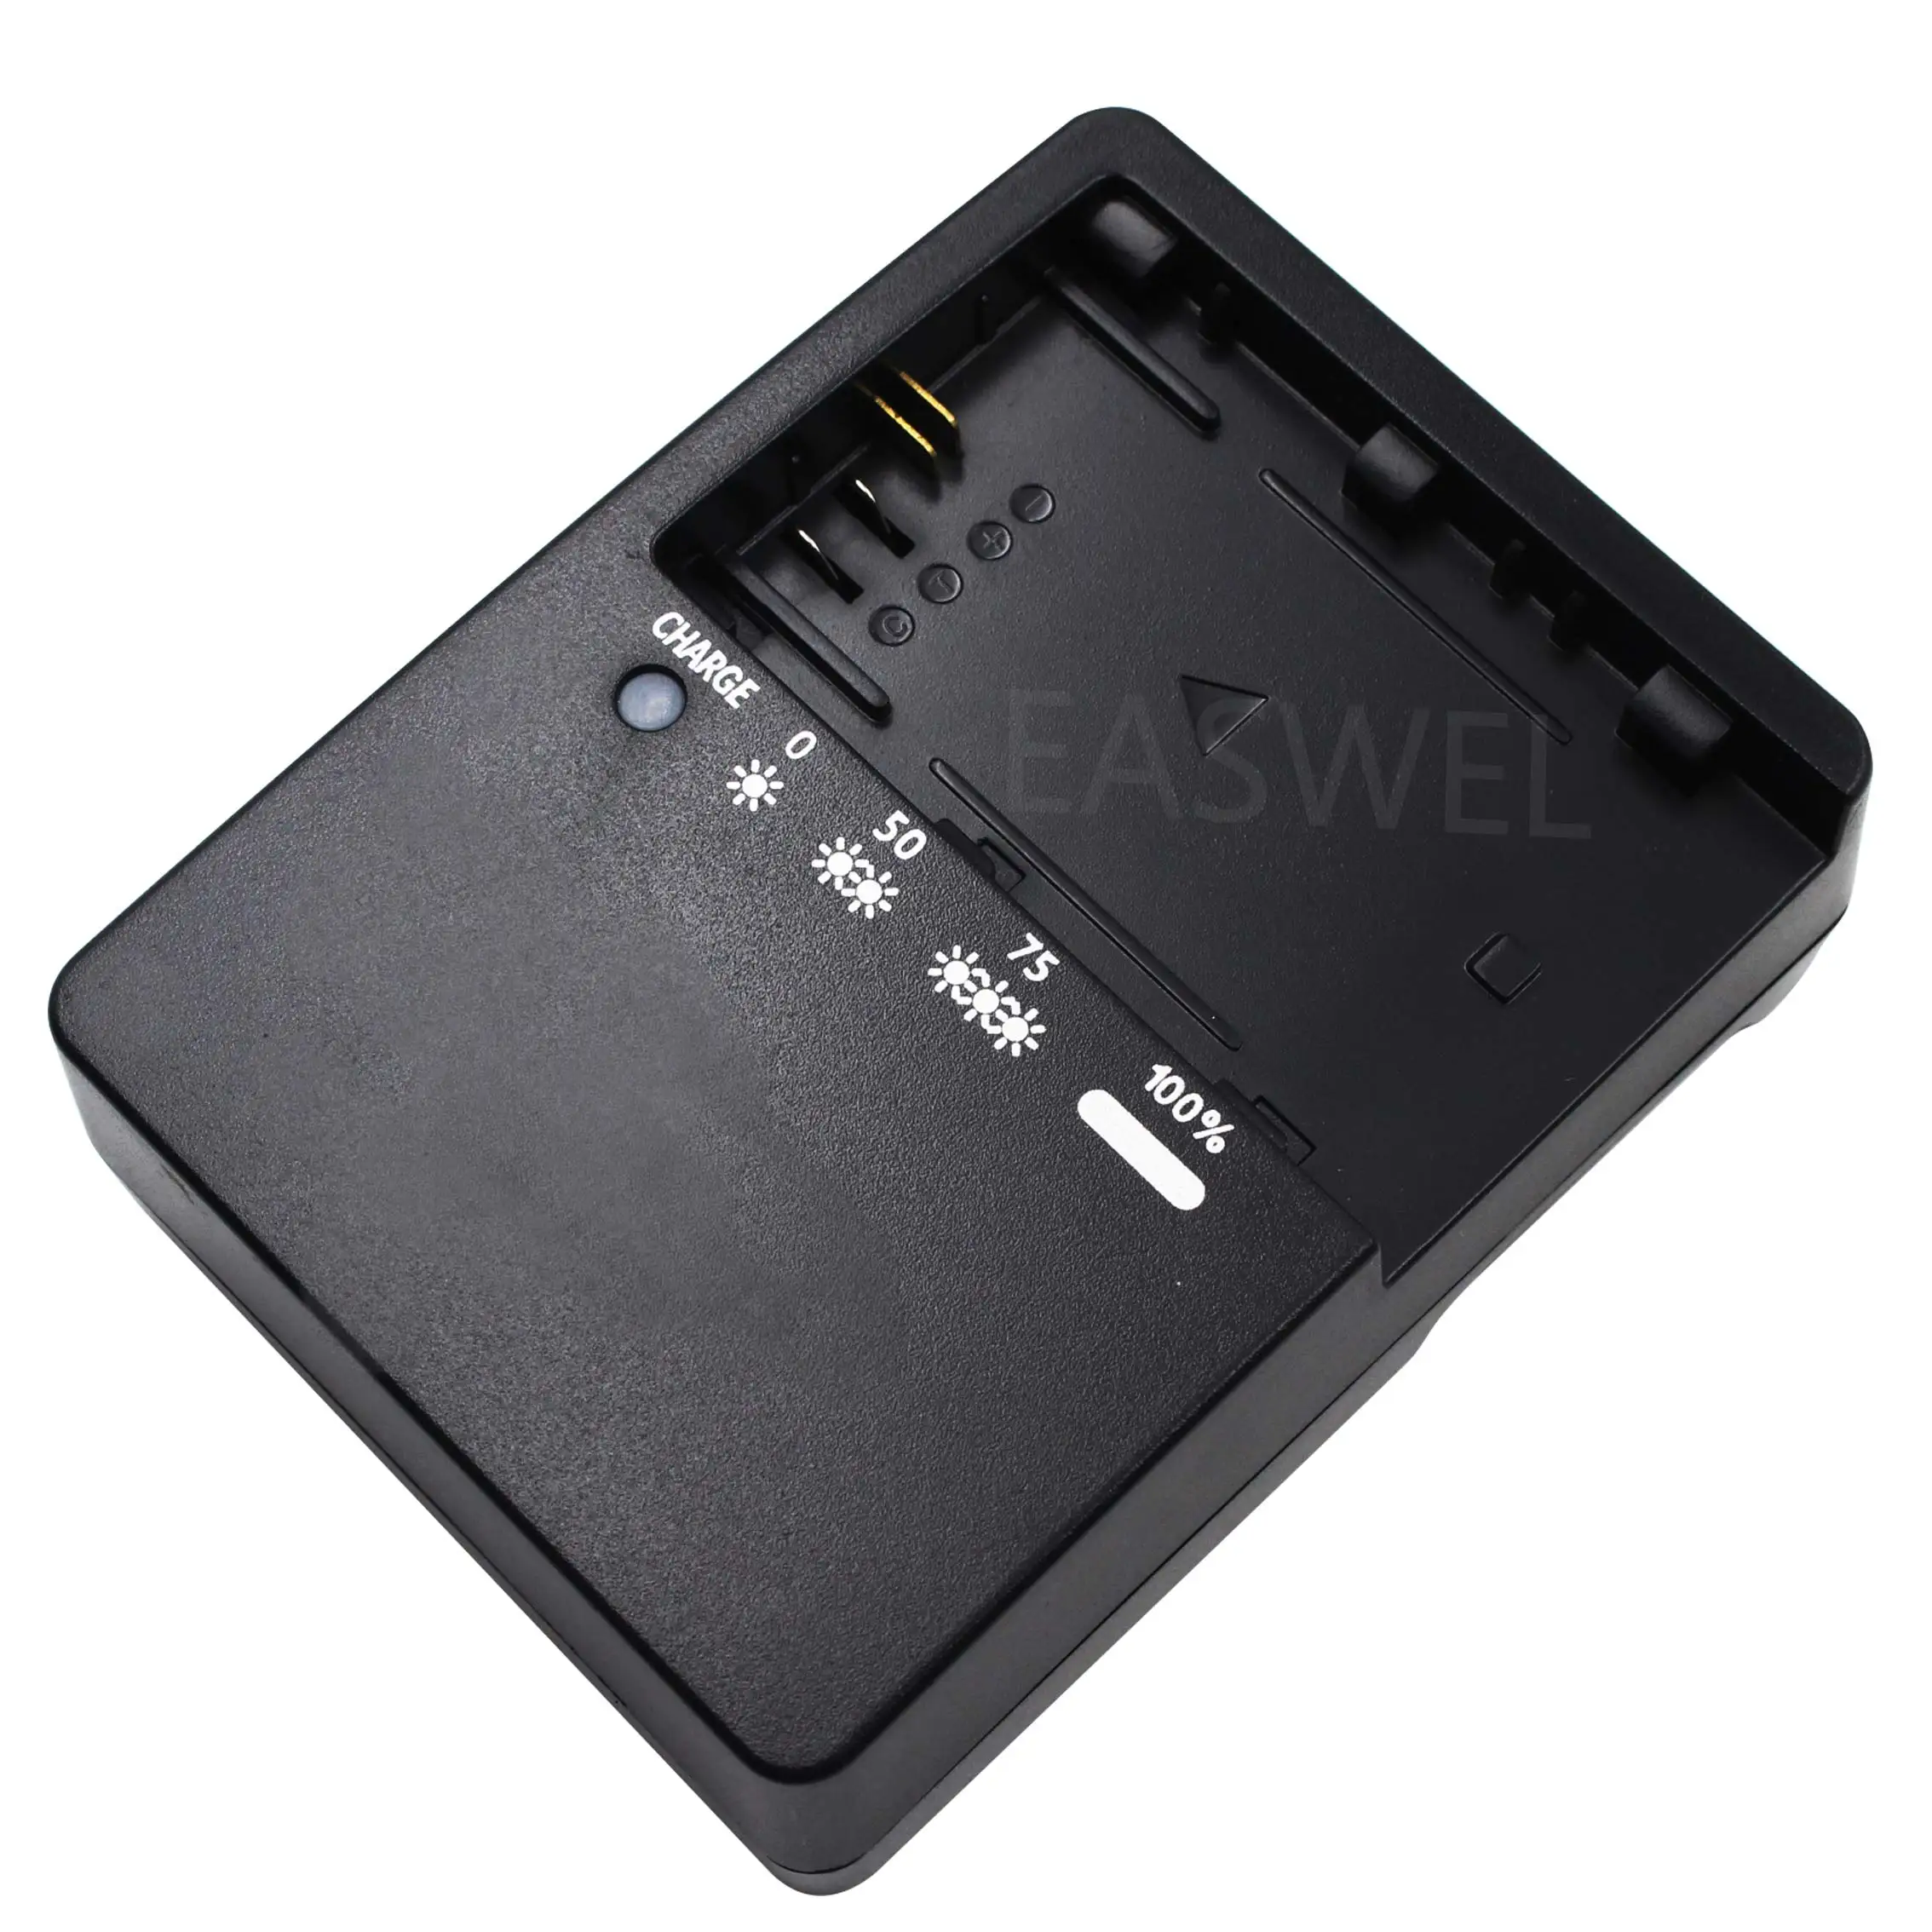 Lc-e6e Battery Charger For Lp-e6 Eos 7d 60d 6d 70d 5d2 5d3 5d Mark Ii Iii -  Buy Lc-e6e,For Lp-e6 Eos 7d 60d,Battery Charger Product on 